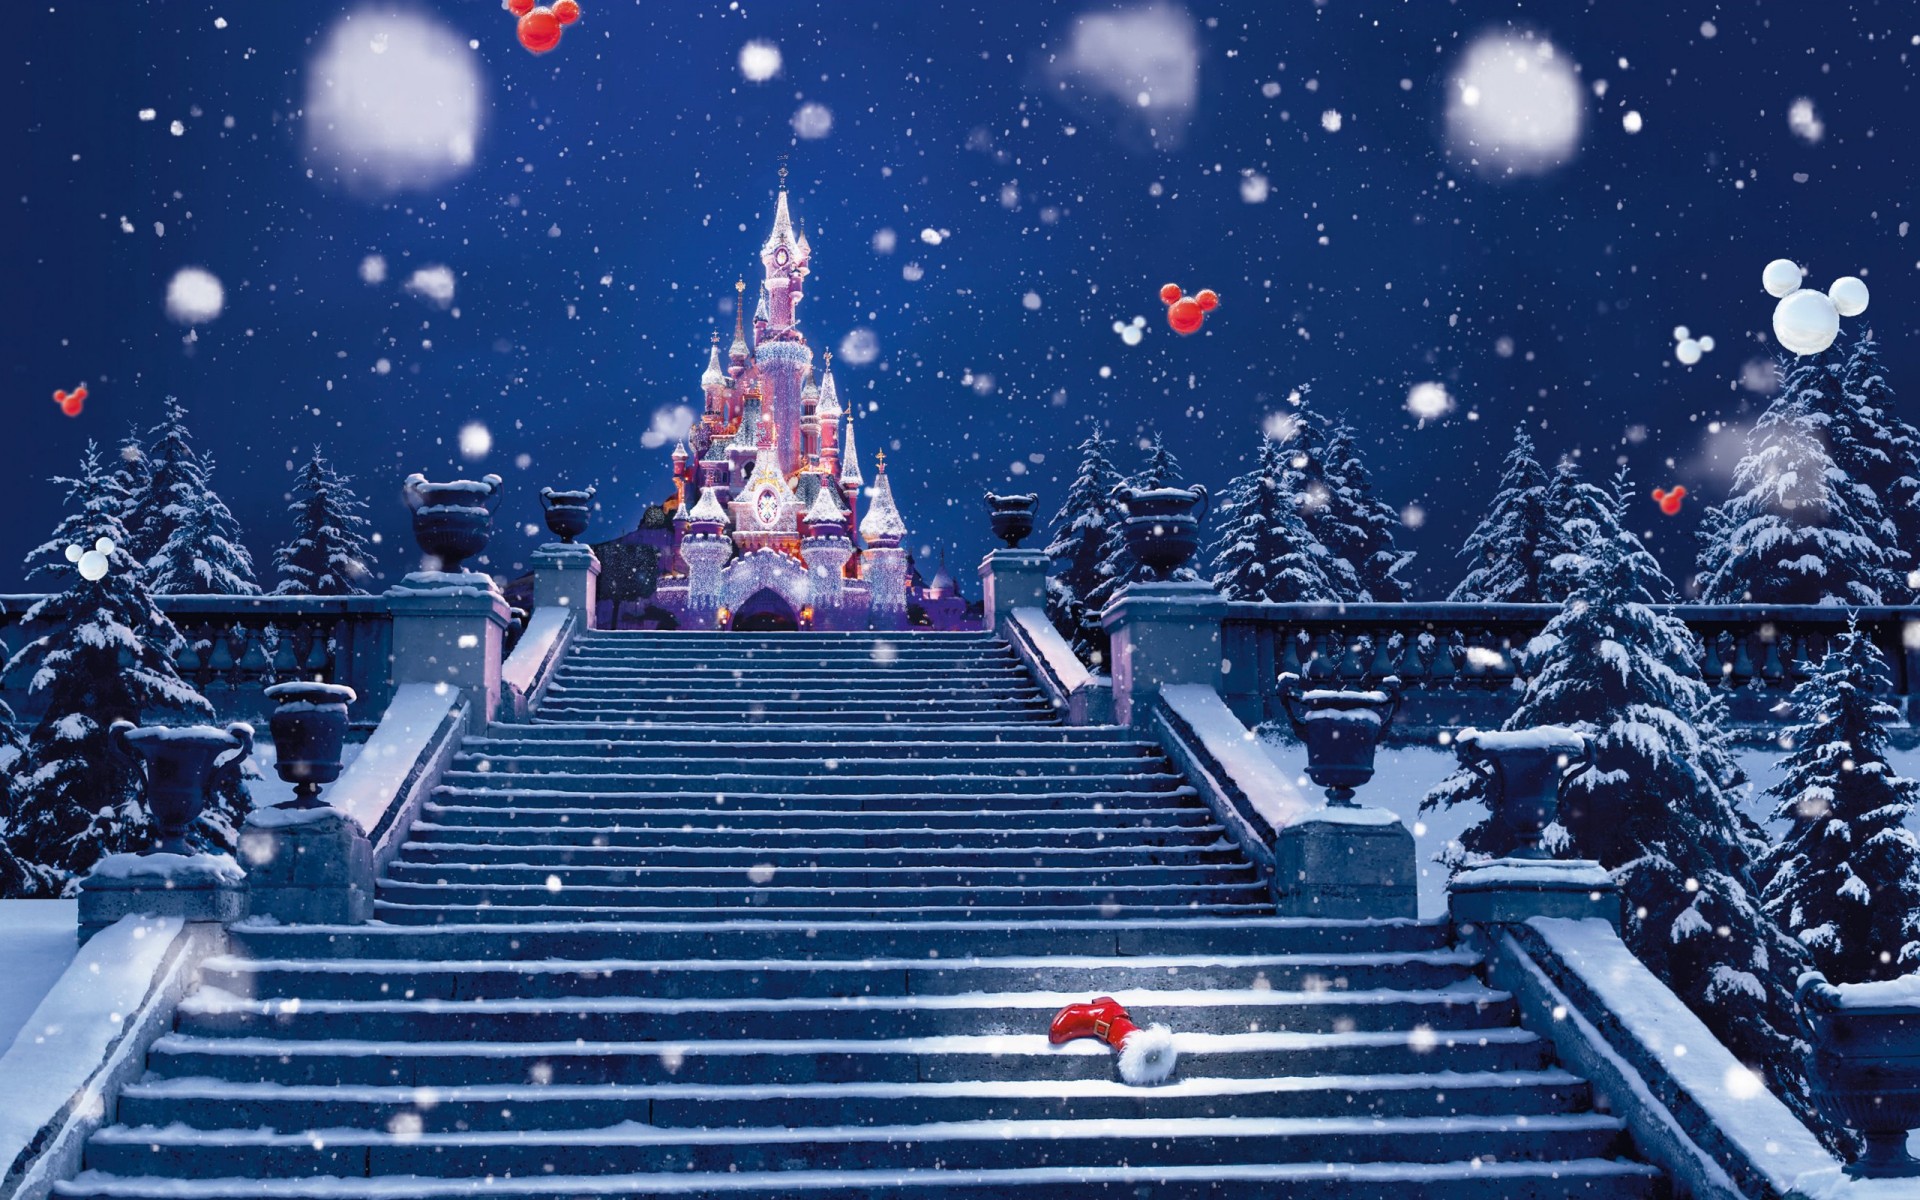 holidays, Christmas, Children, Disney, Winter, Snow, Snowing, Flakes, Drops, Stairs, Magical, Castle, Mickey Wallpaper